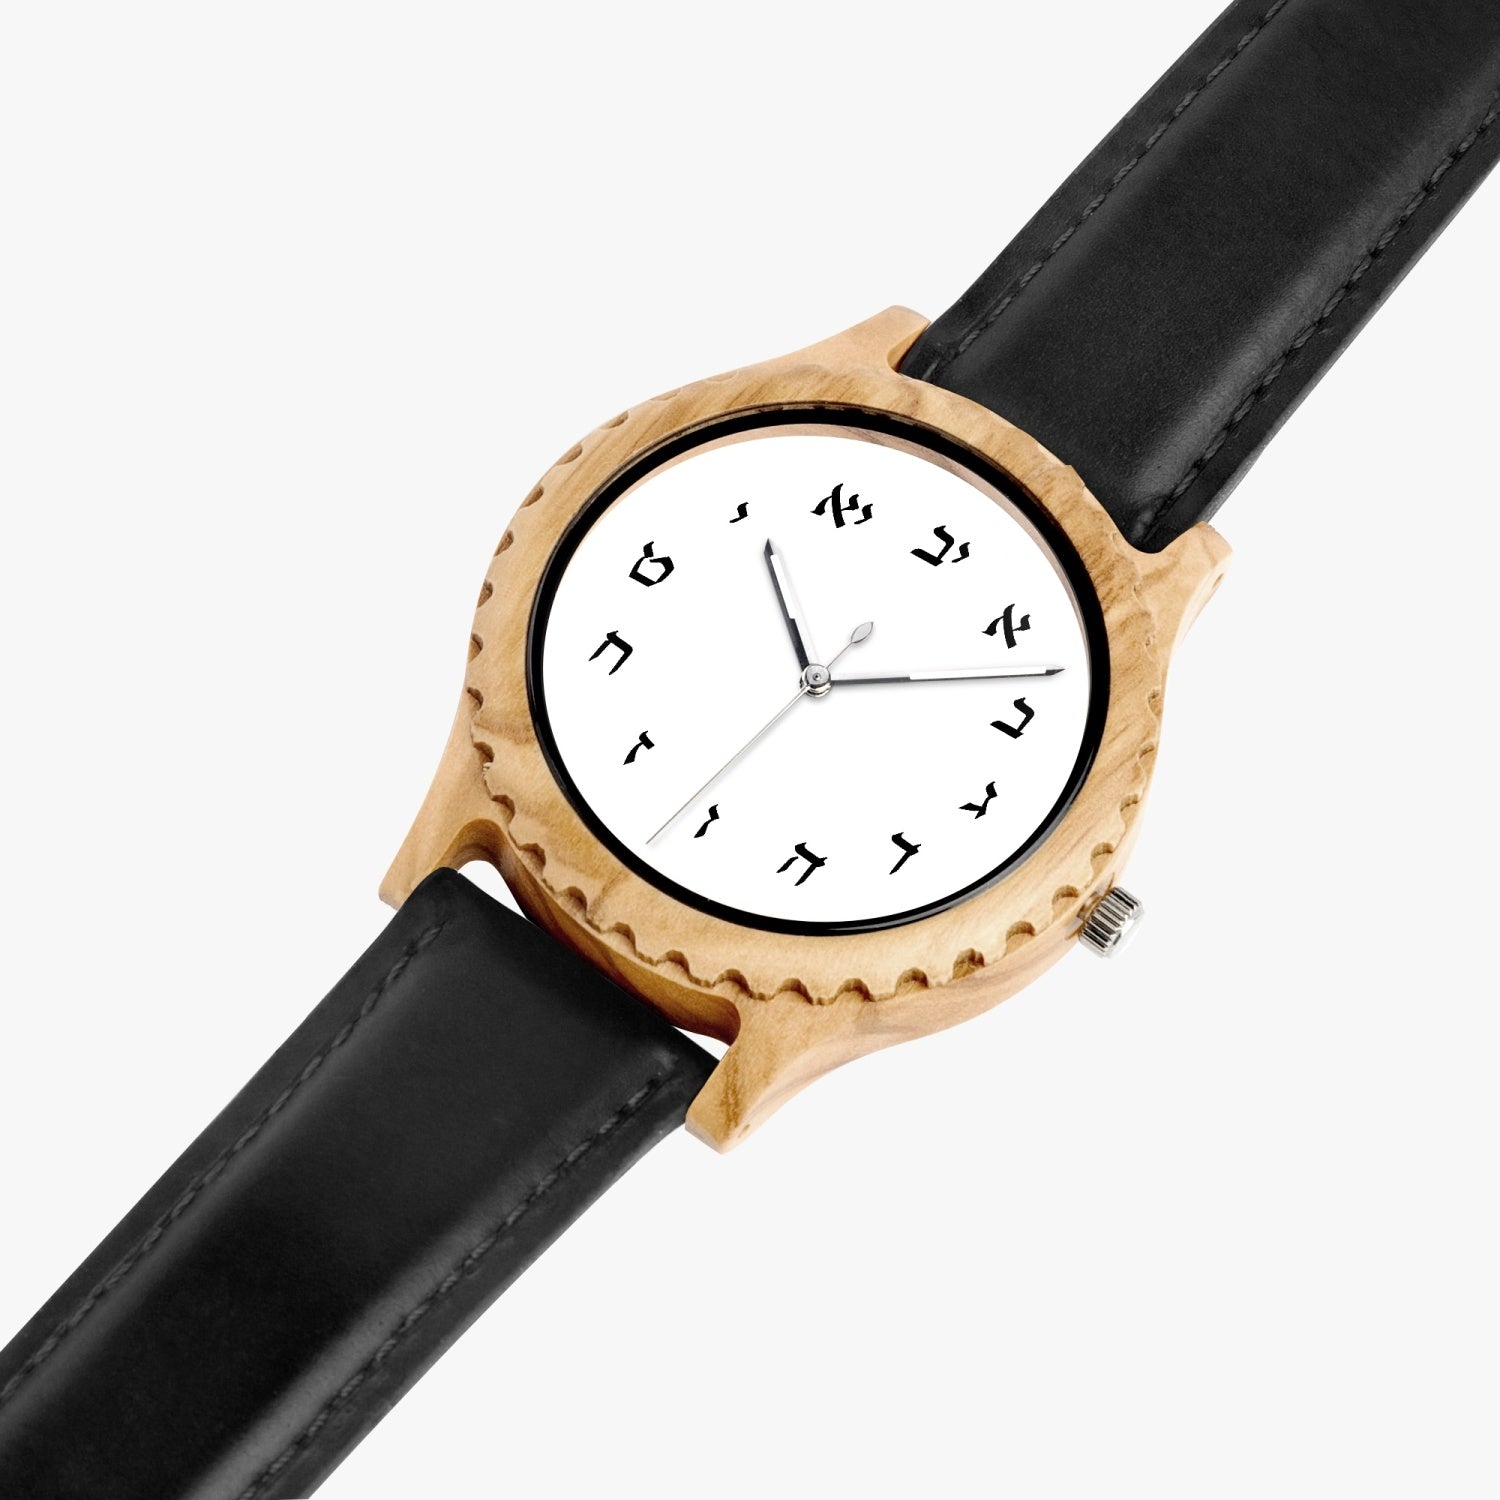 Hebrew Wooden Watch - Black Leather Strap angled